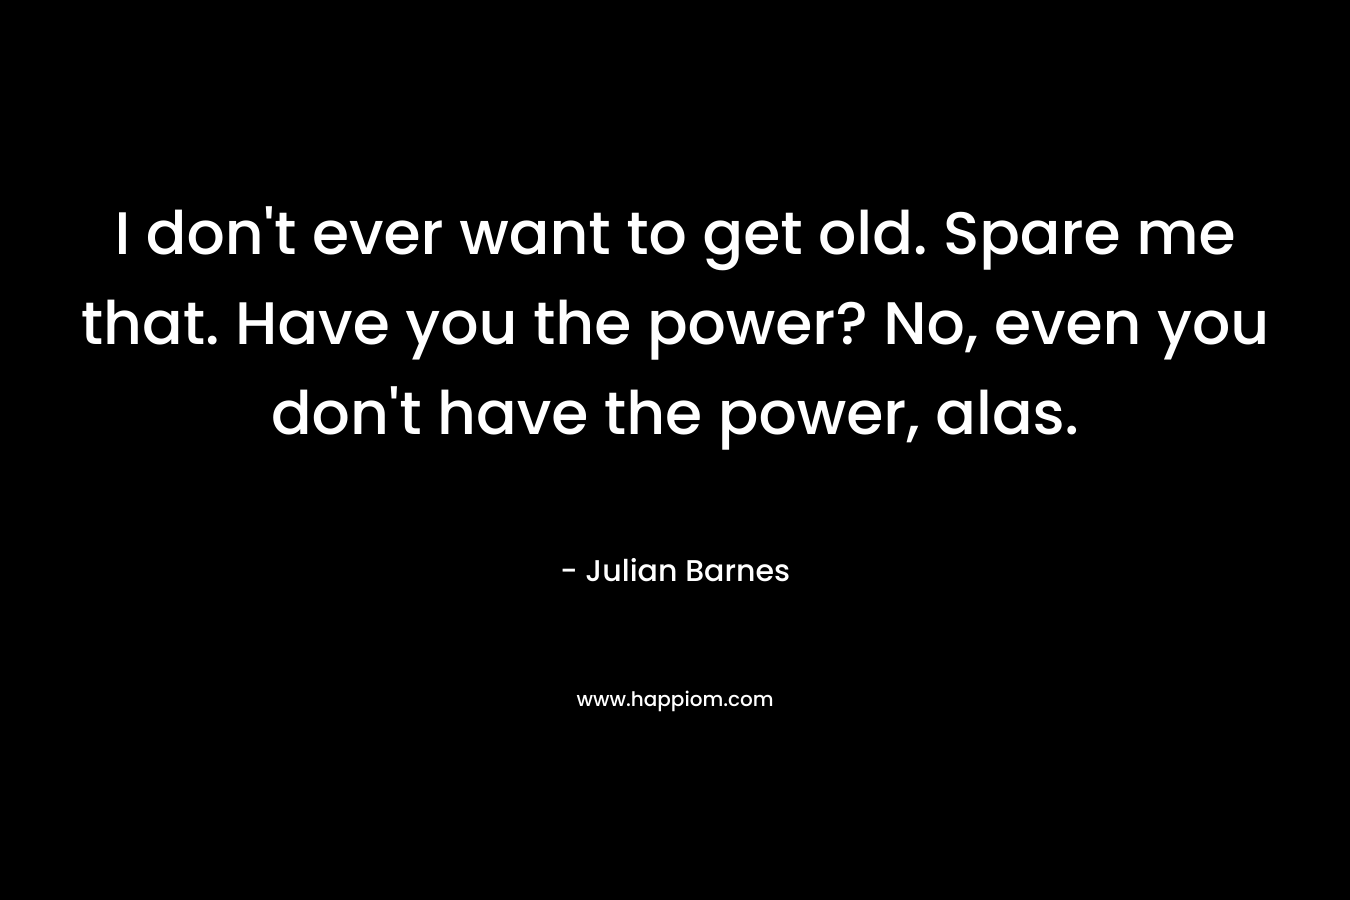 I don’t ever want to get old. Spare me that. Have you the power? No, even you don’t have the power, alas. – Julian Barnes